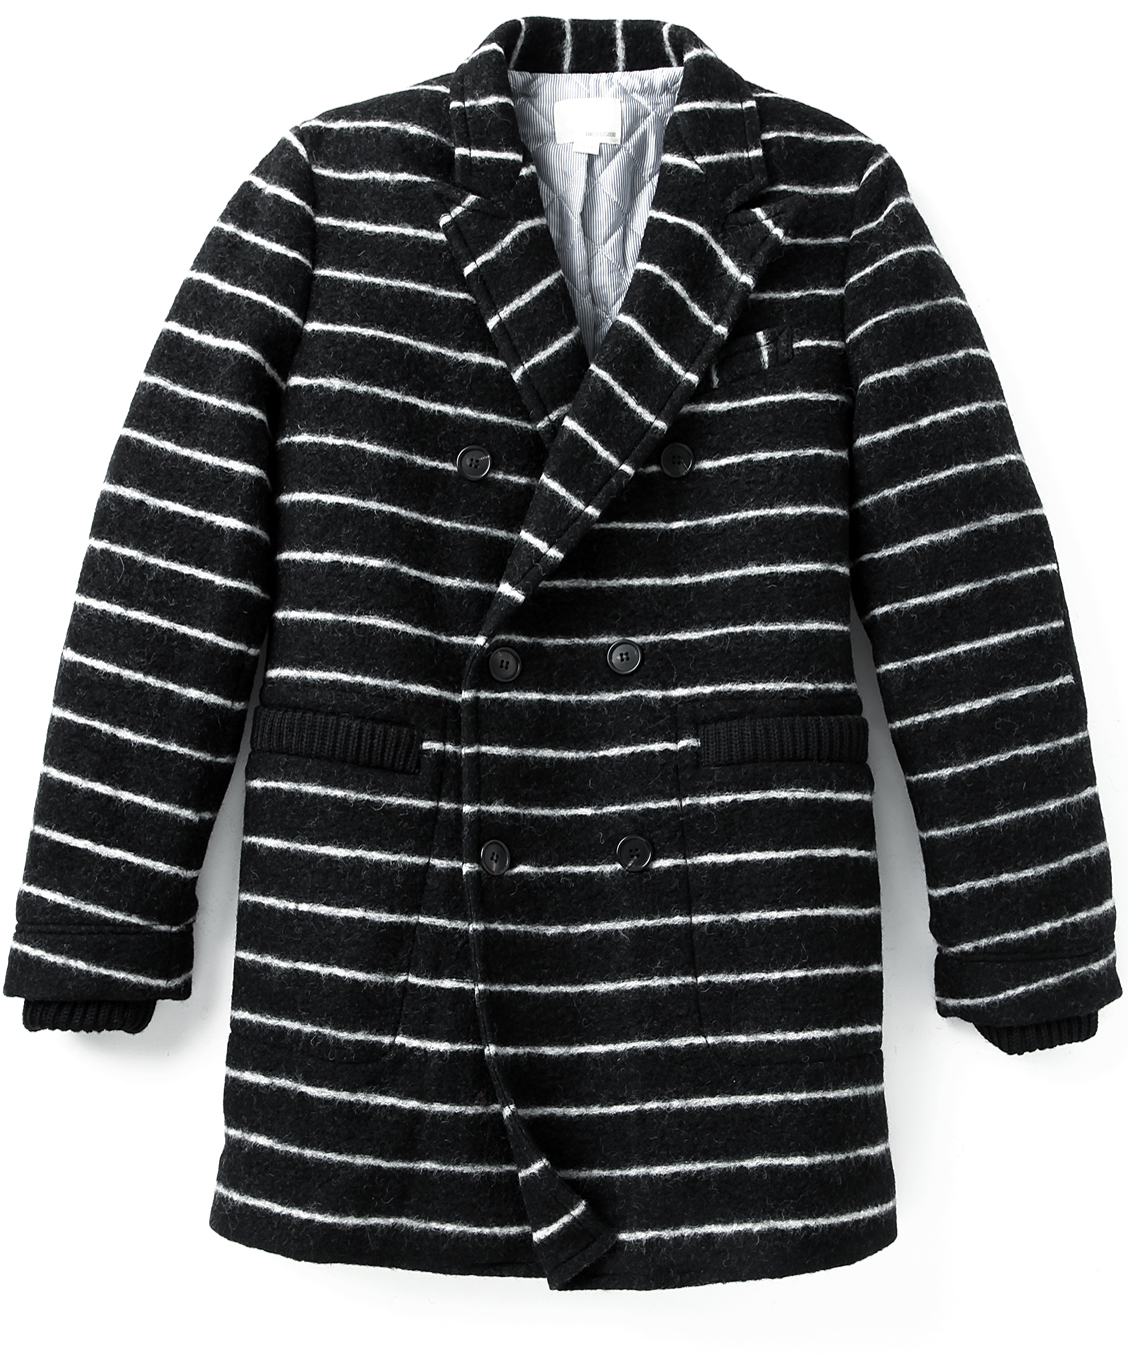 Band of Outsiders Double Breasted Striped Coat